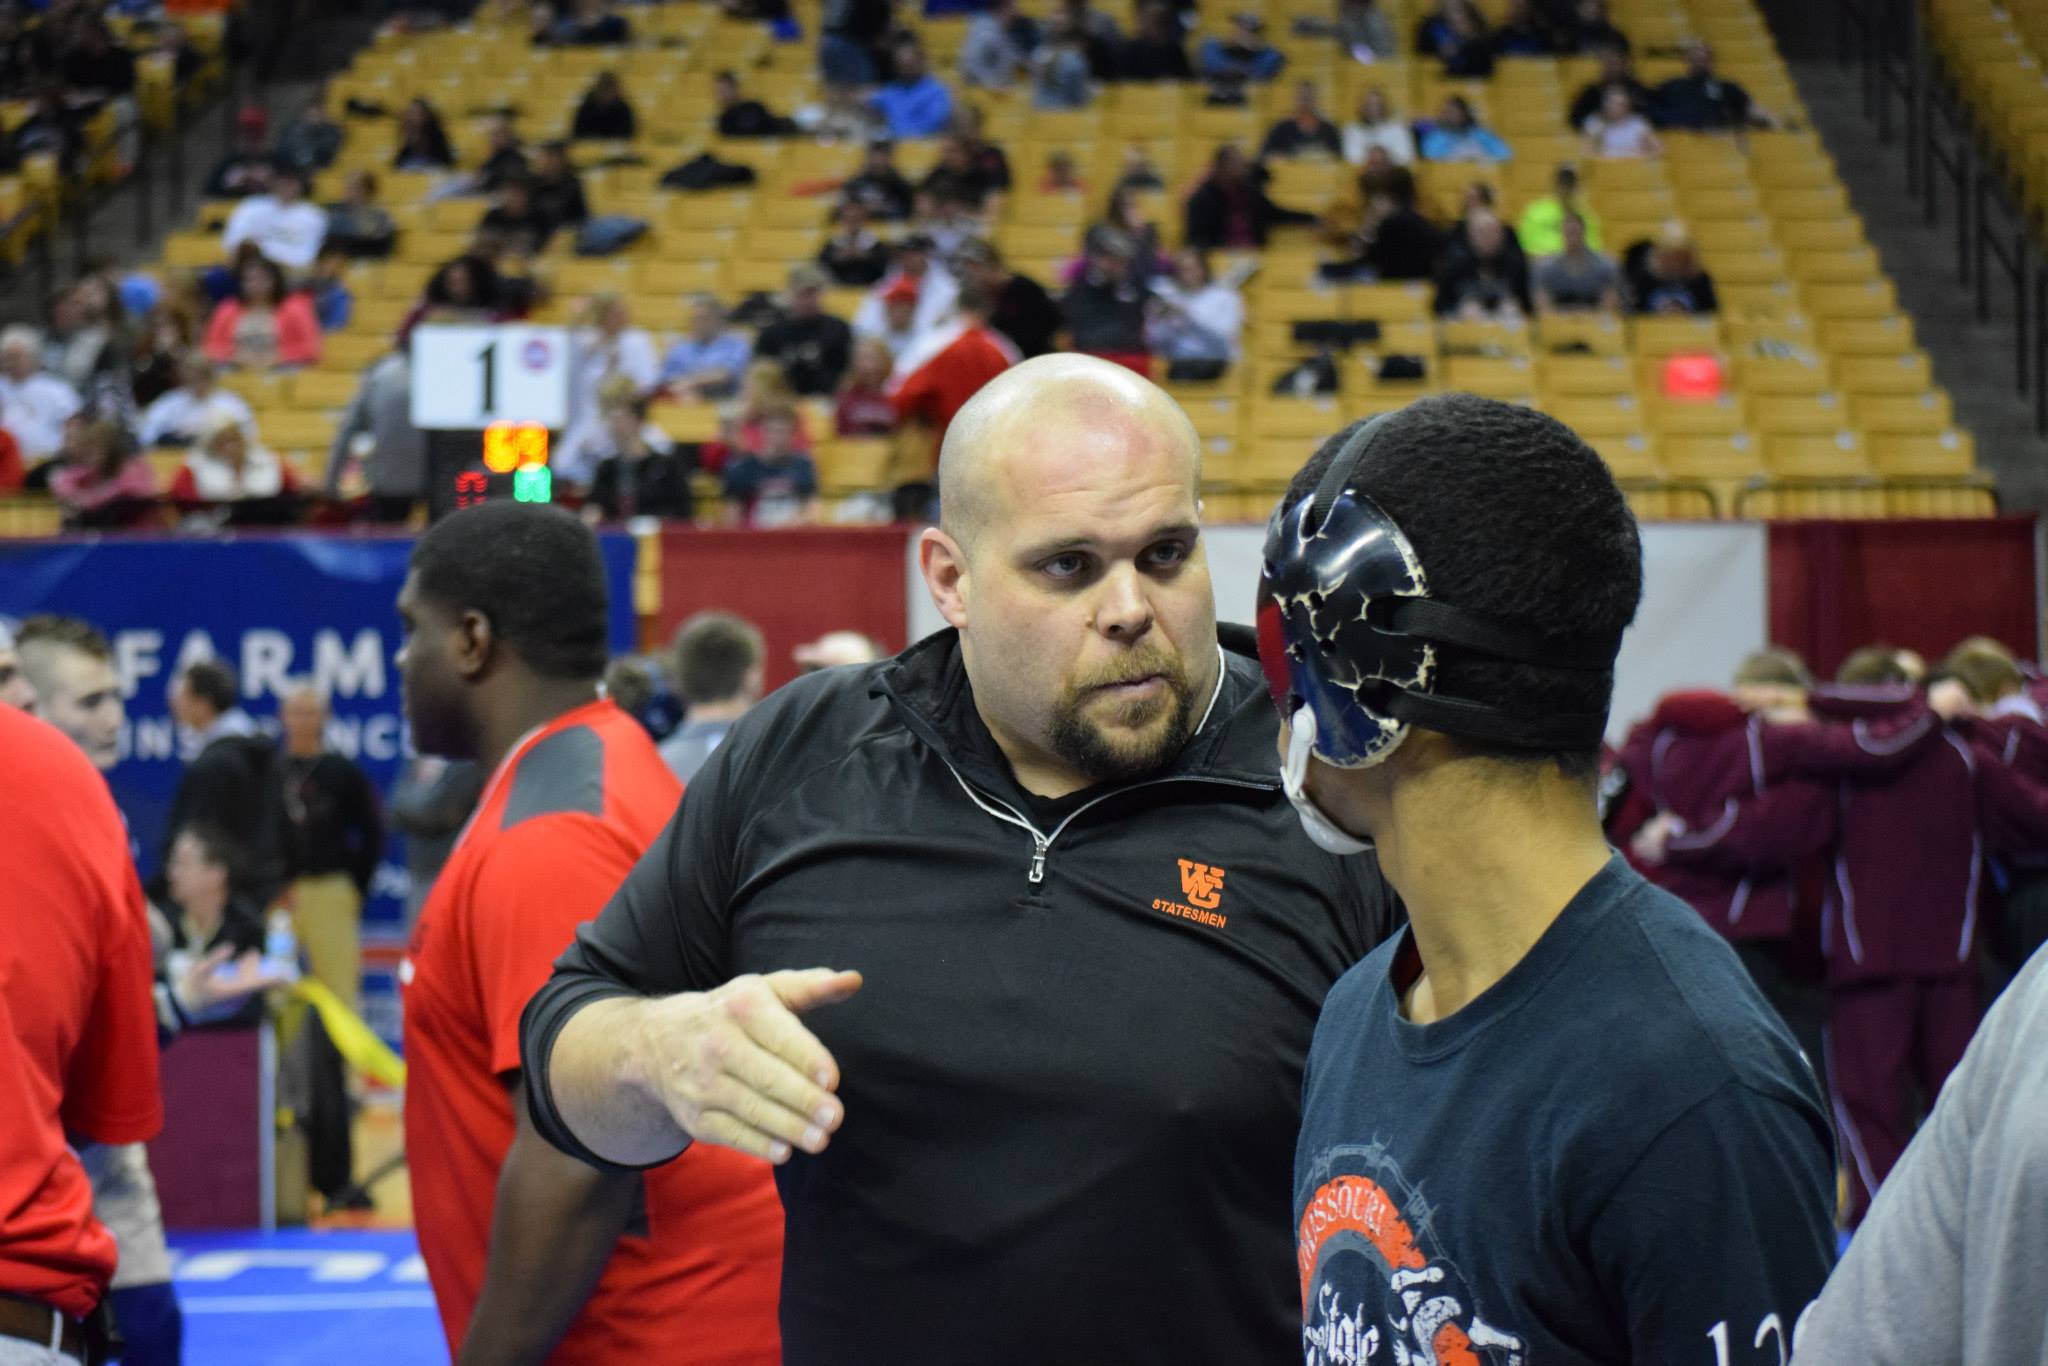 Coach James Lemay, at the 2015 Missouri State Championships.